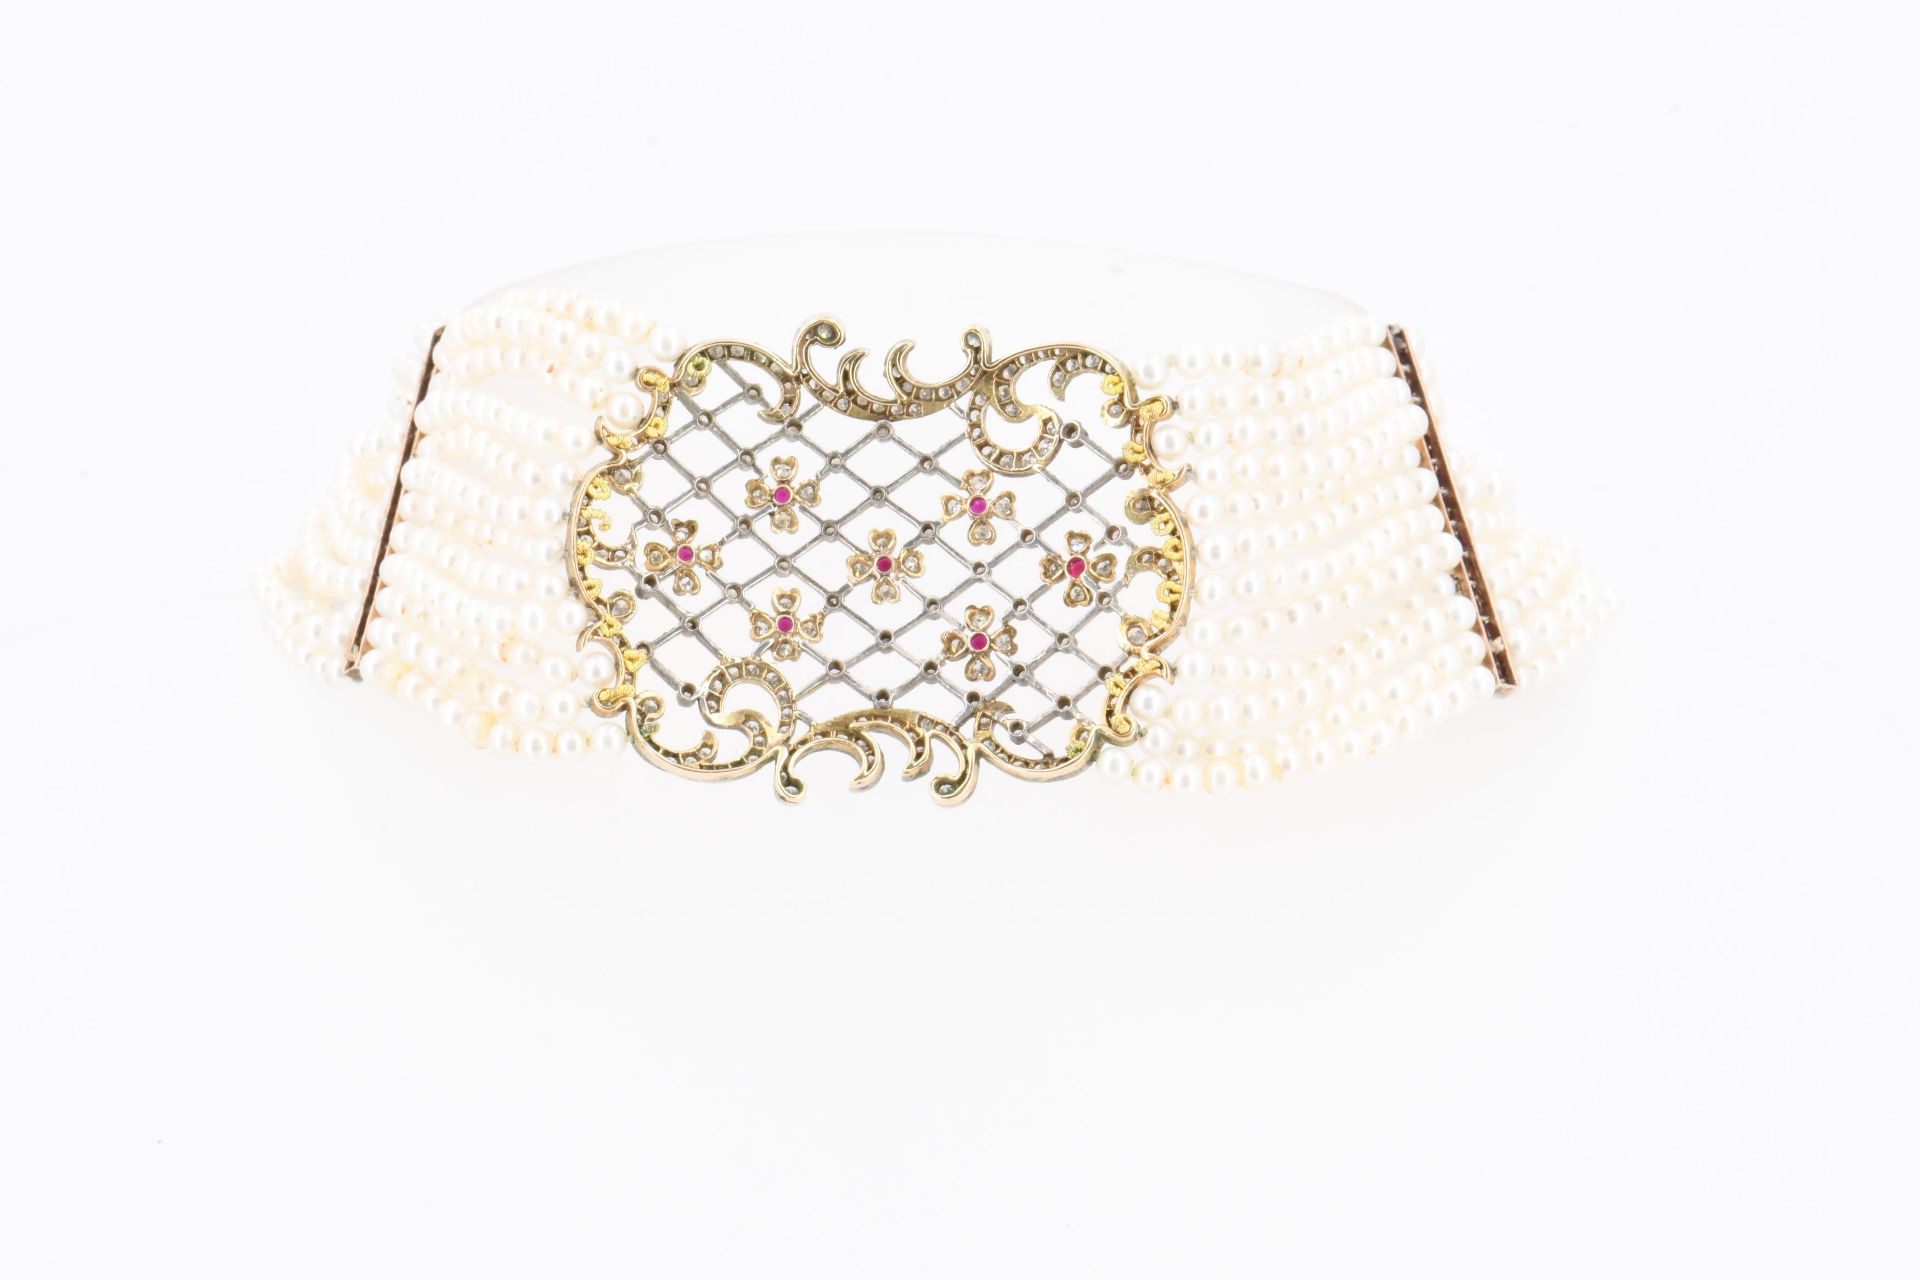 Seed Pearl Collier de Chien - Image 3 of 4